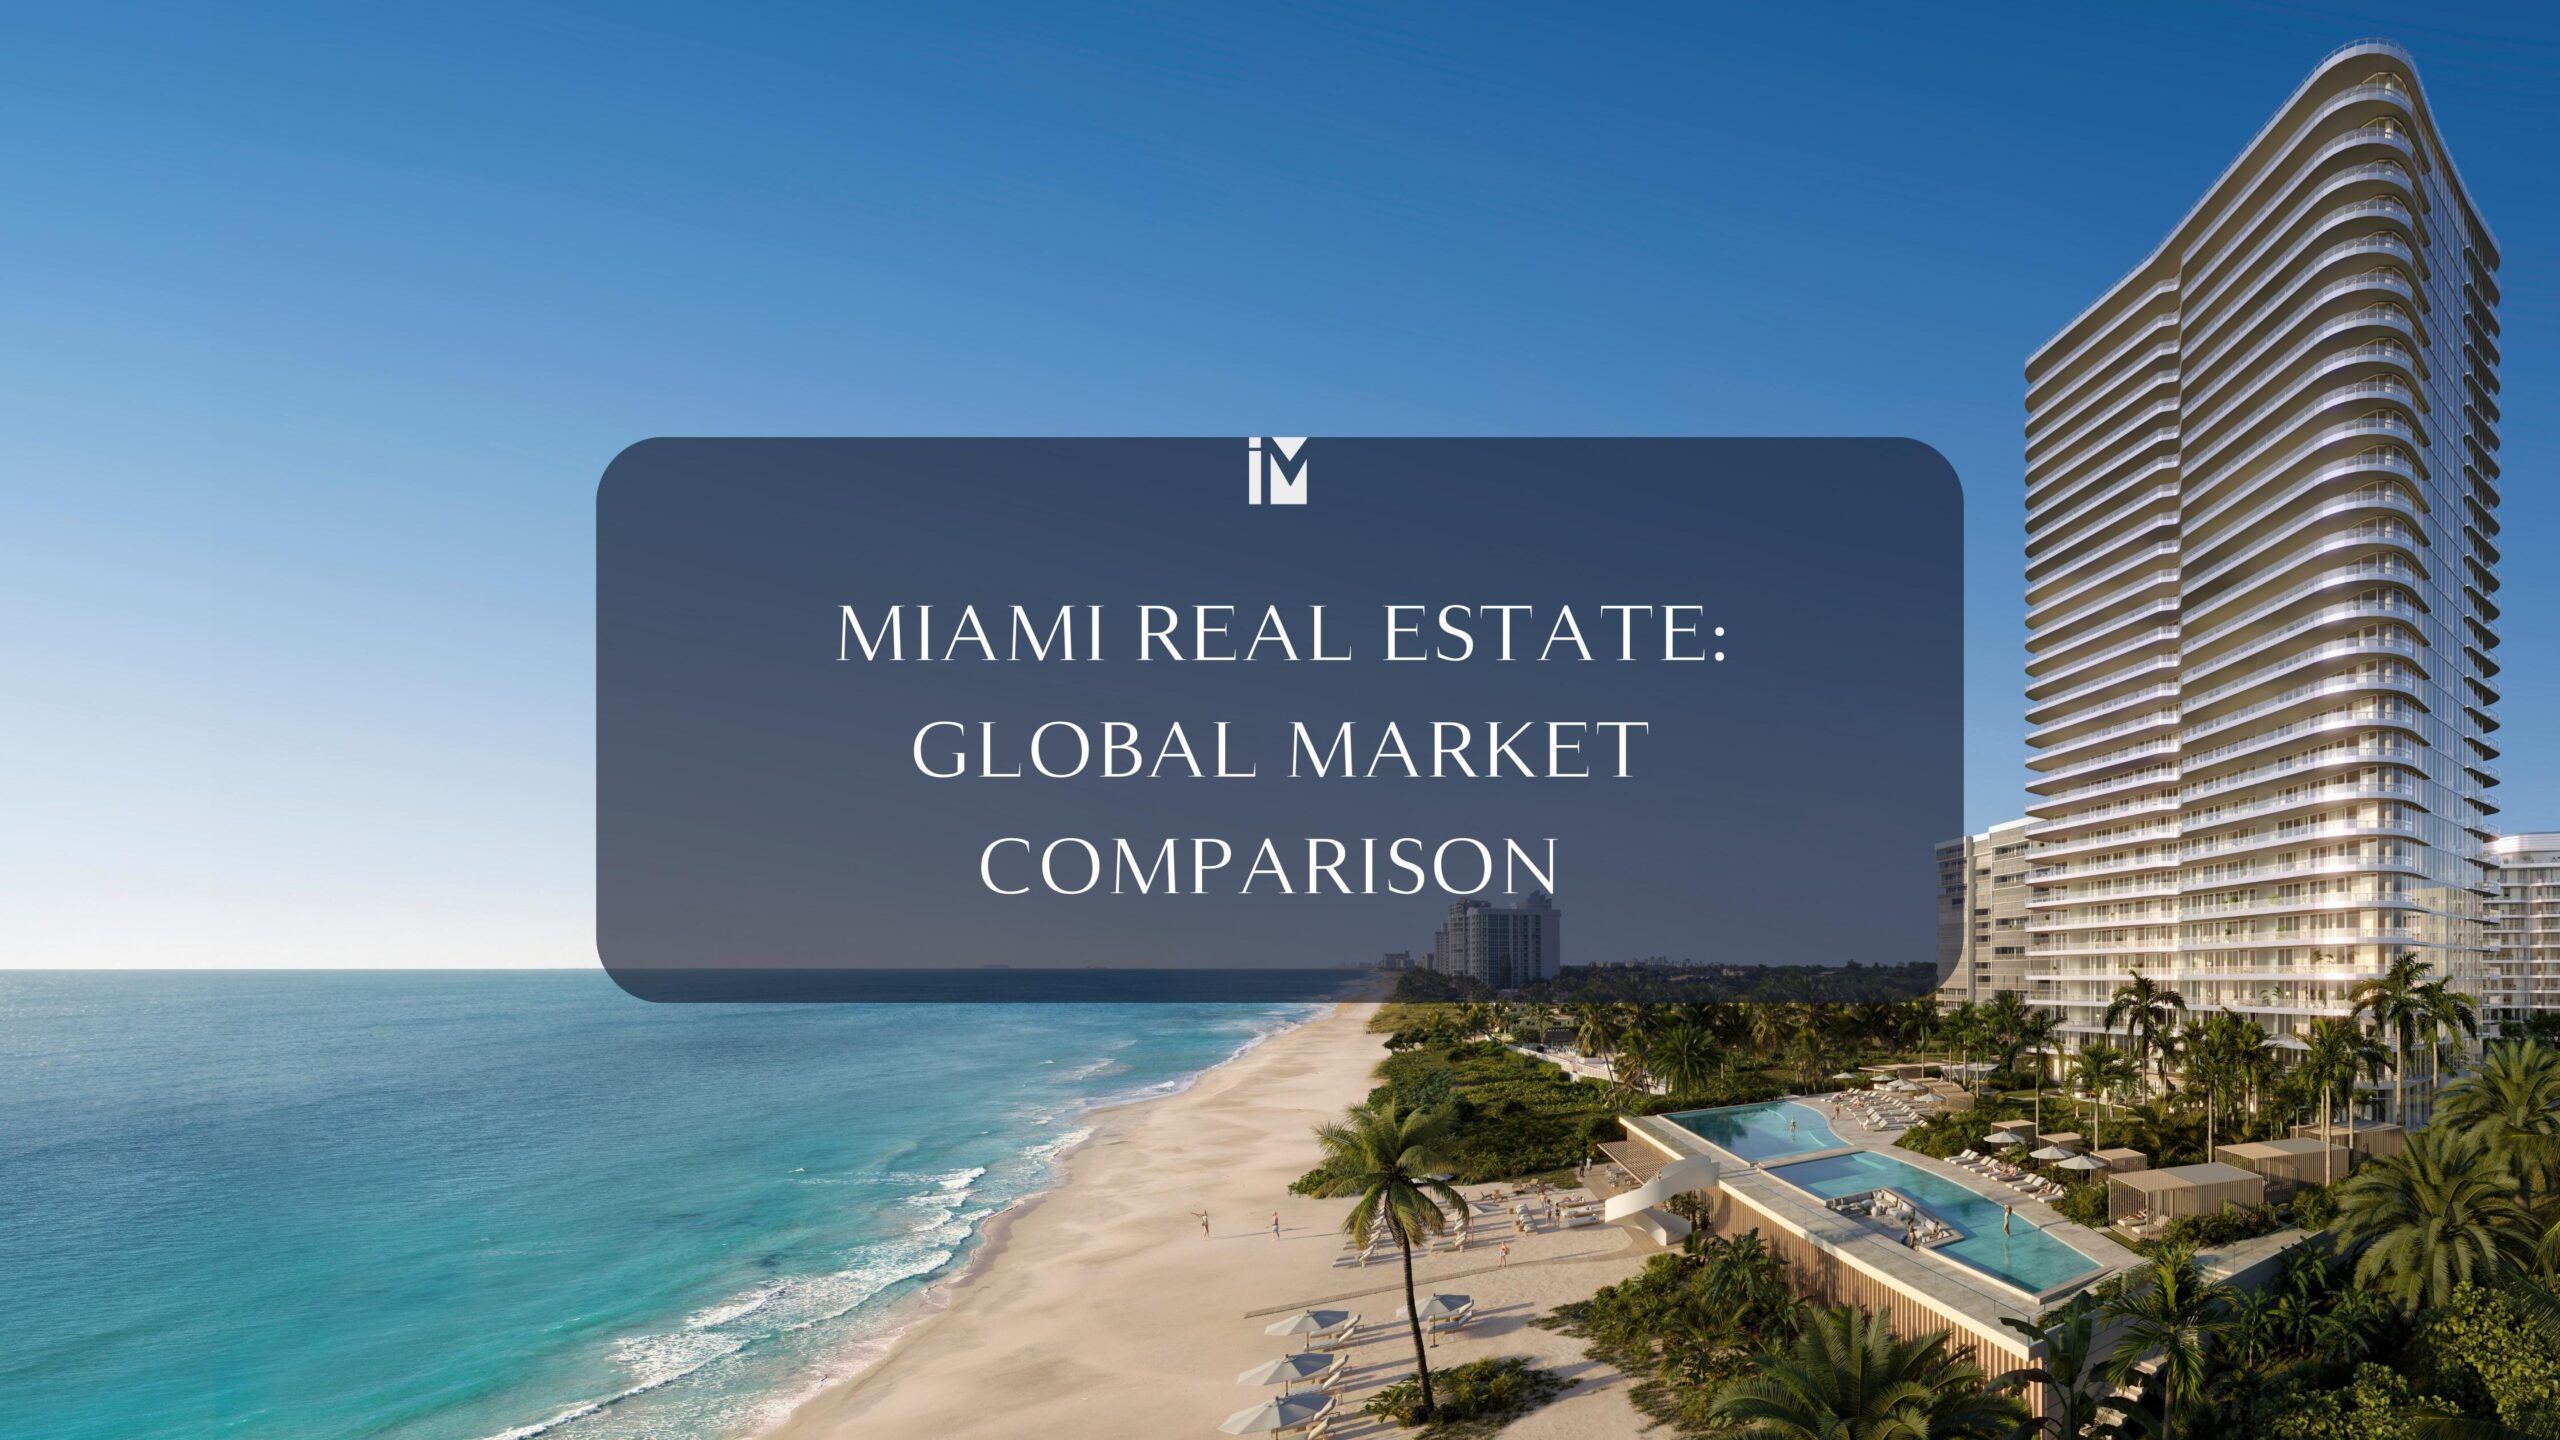 Miami Real Estate vs. Other Global Markets: Where Does It Stand?